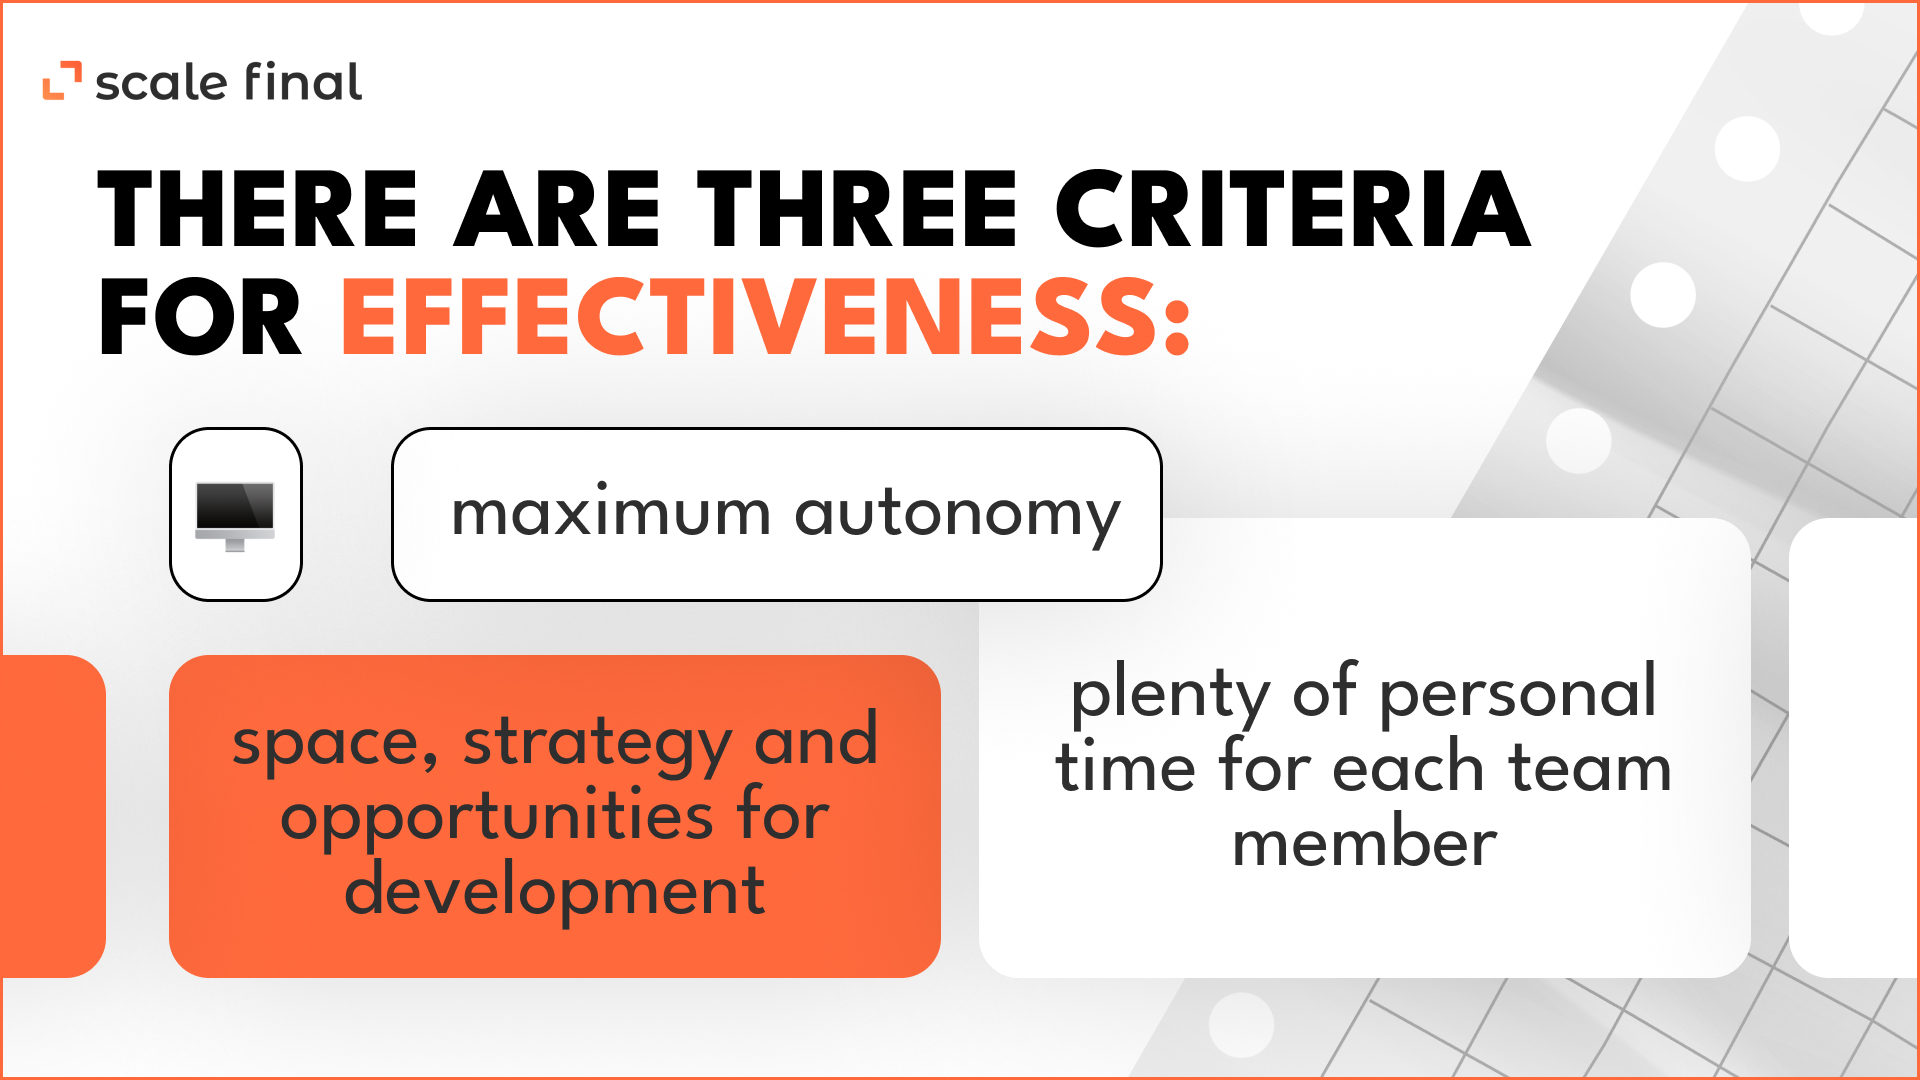 There are three criteria for effectiveness:

maximum autonomy;

space, strategy and opportunities for development;

plenty of personal time for each team member.